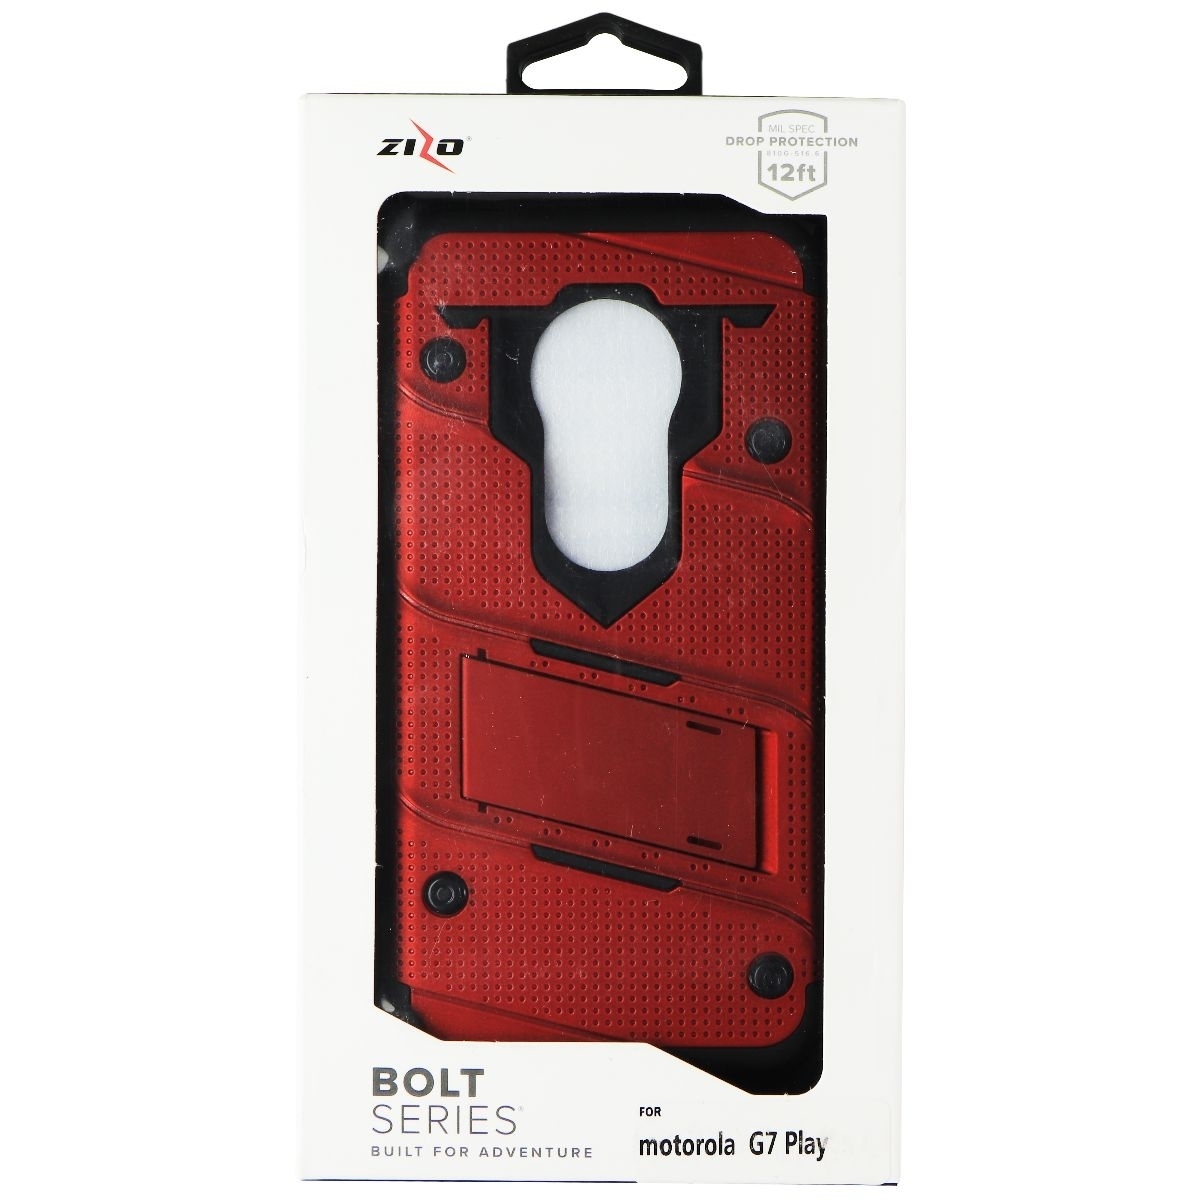 Zizo Bolt Series Case And Holster For Motorola G7 Play - Red/Black (Refurbished)